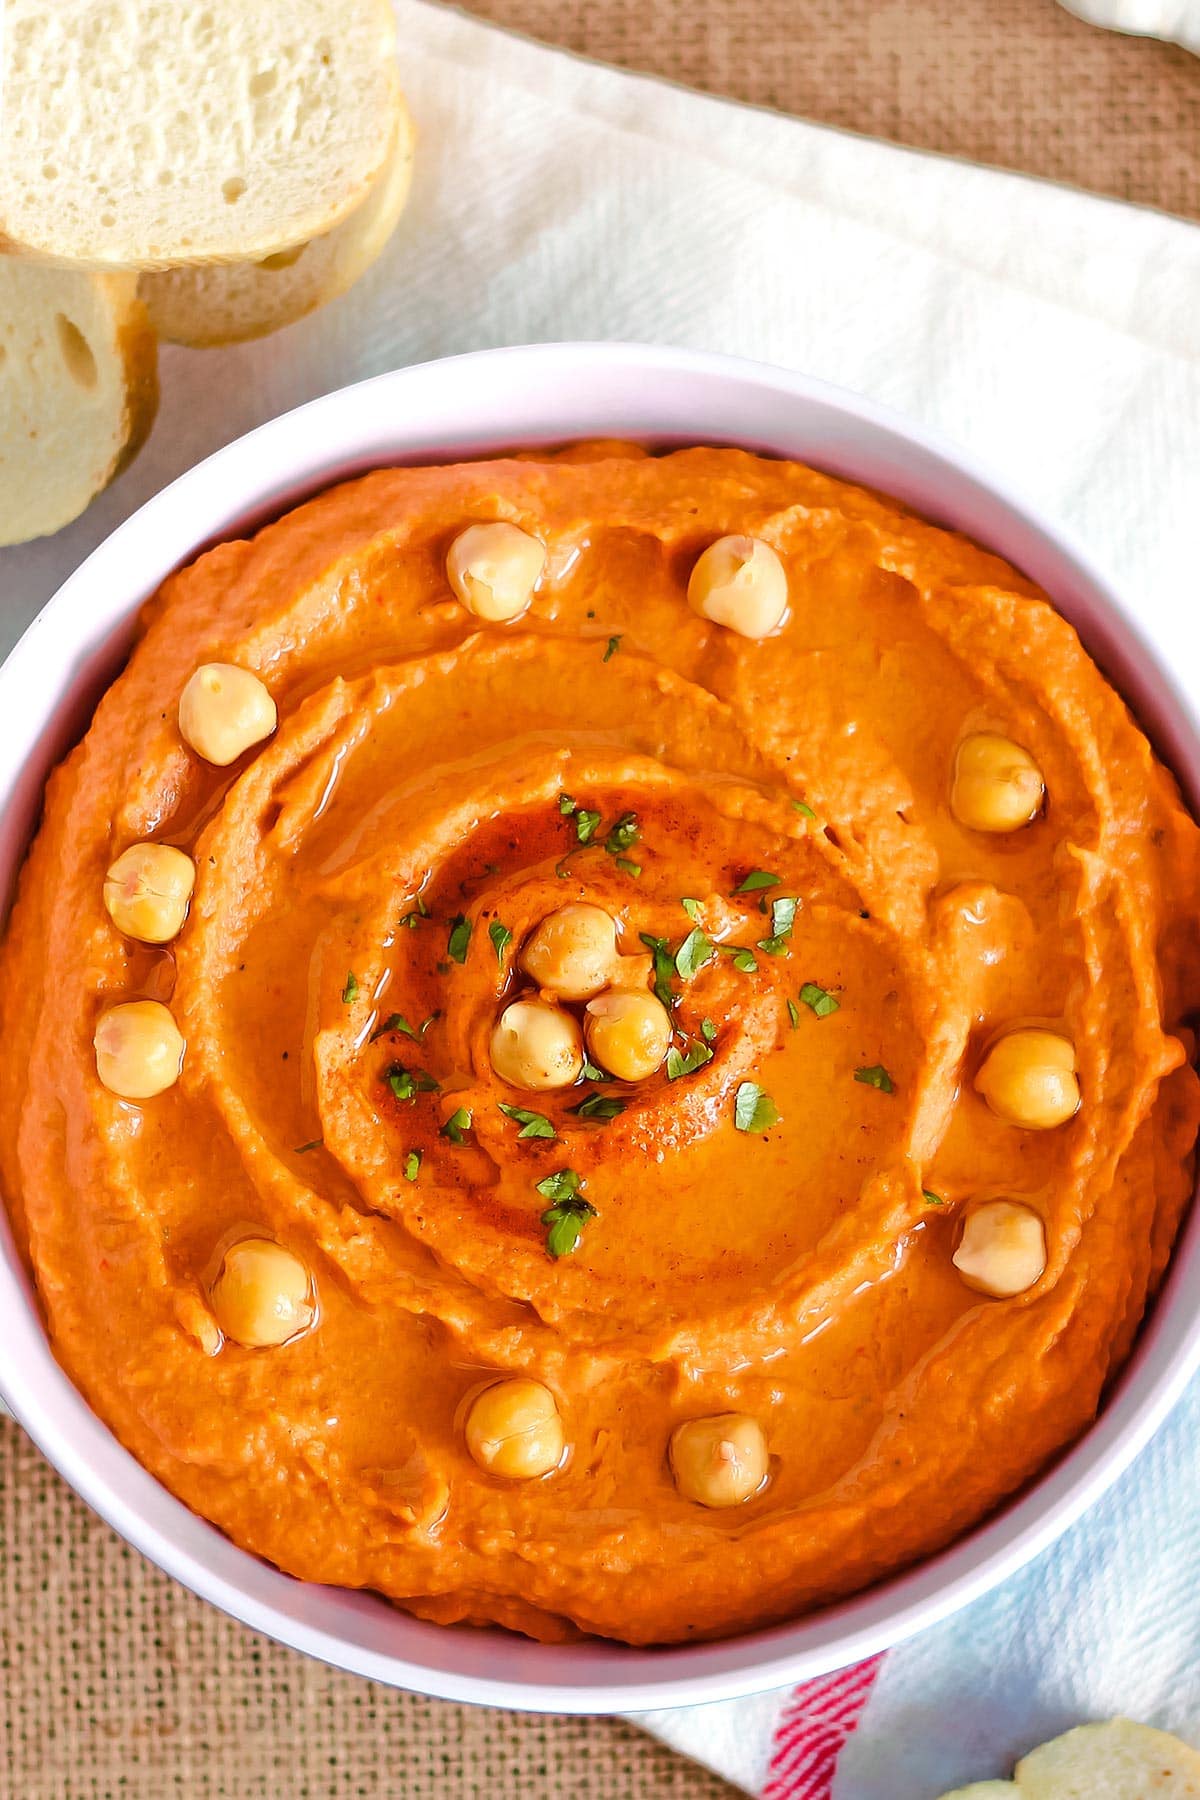 Bowl of red pepper hummus with bread slices on side